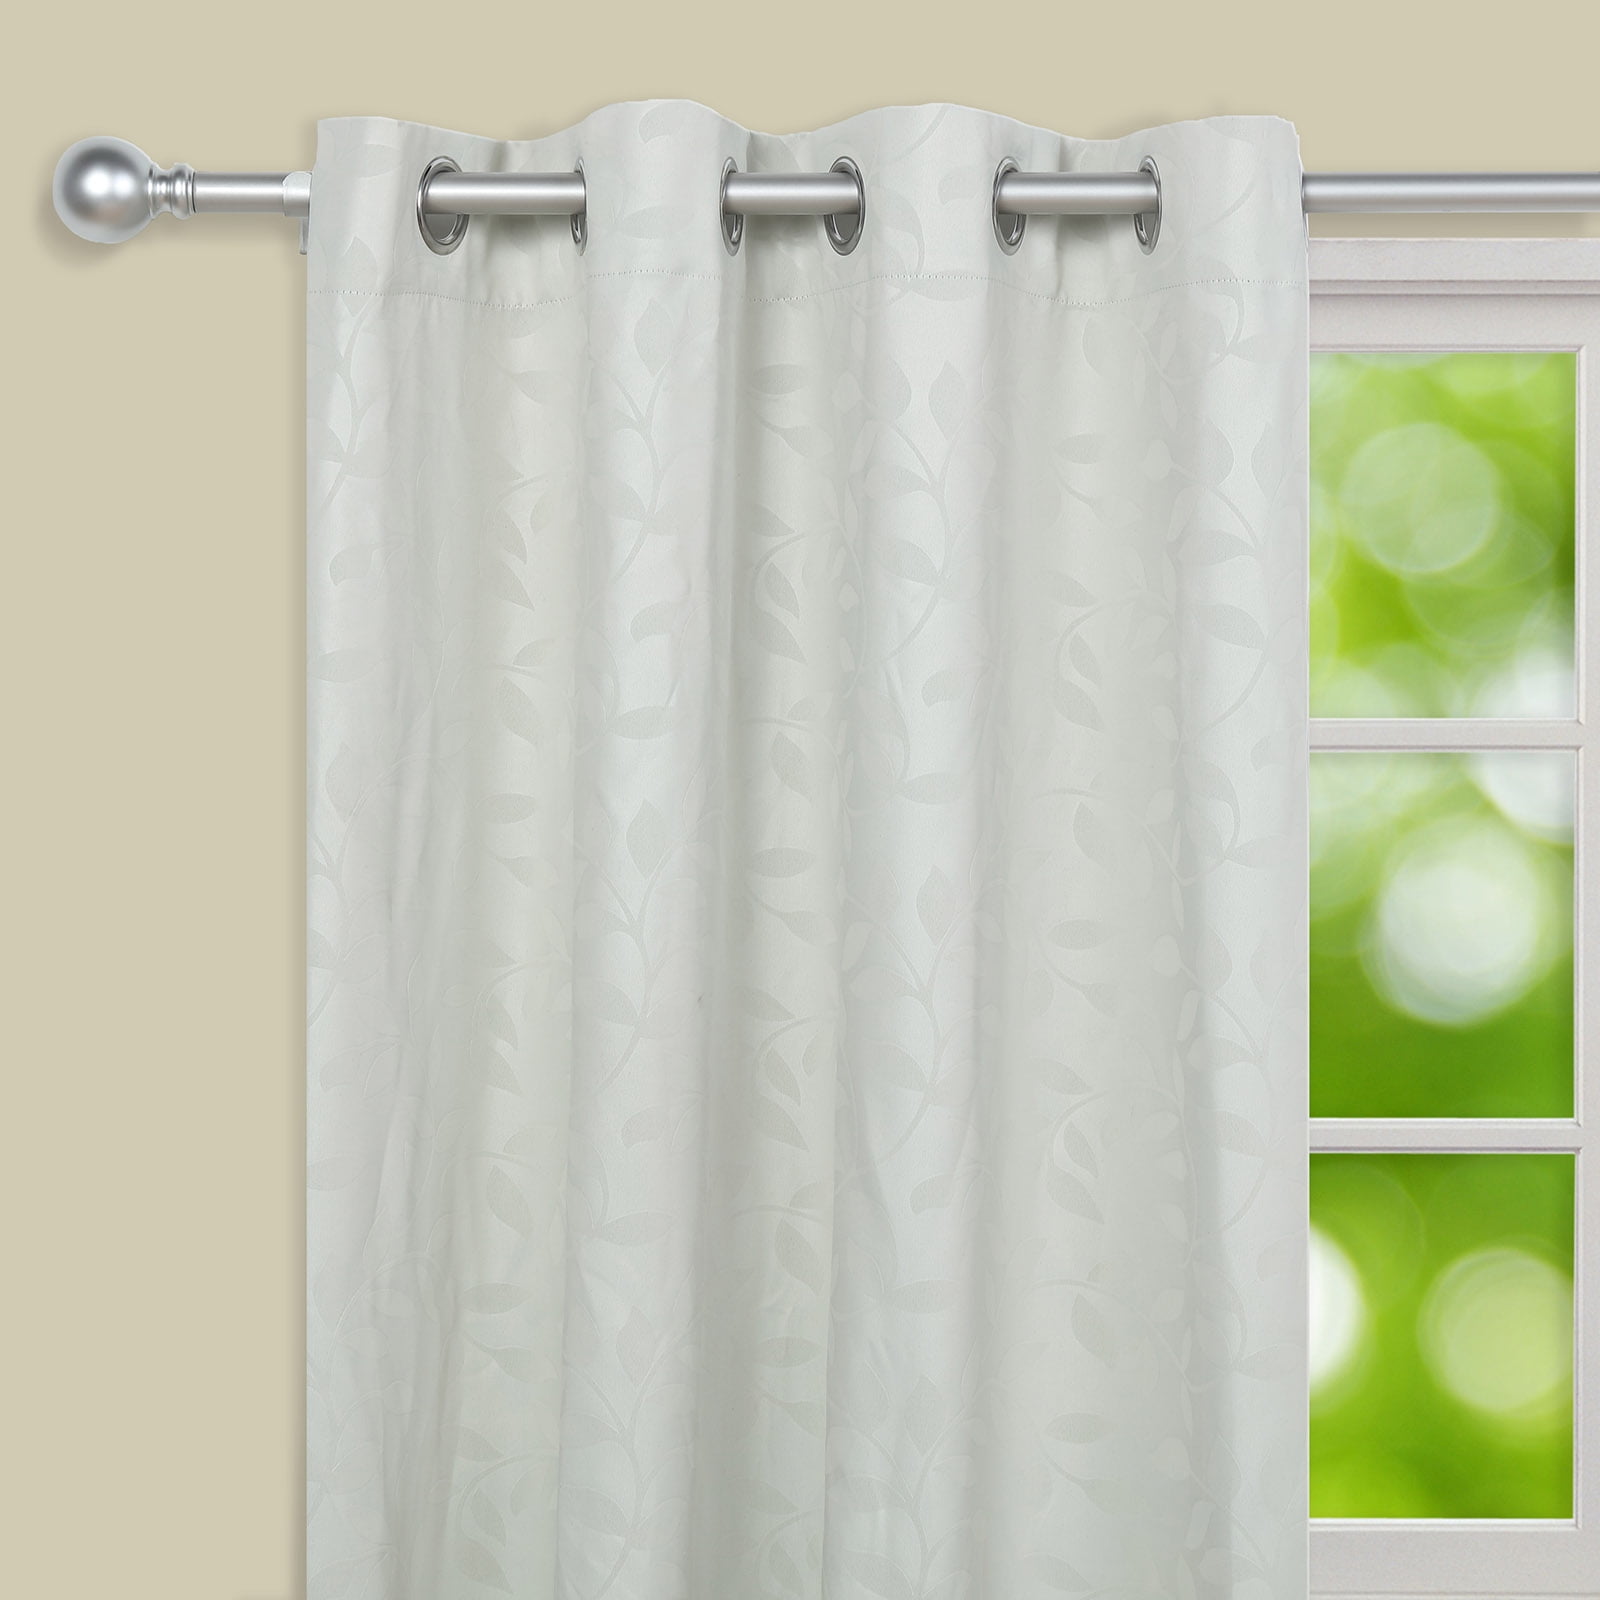 Silver Adjustable Metal Curtain Rod Set, Round Curtain Rods For Window